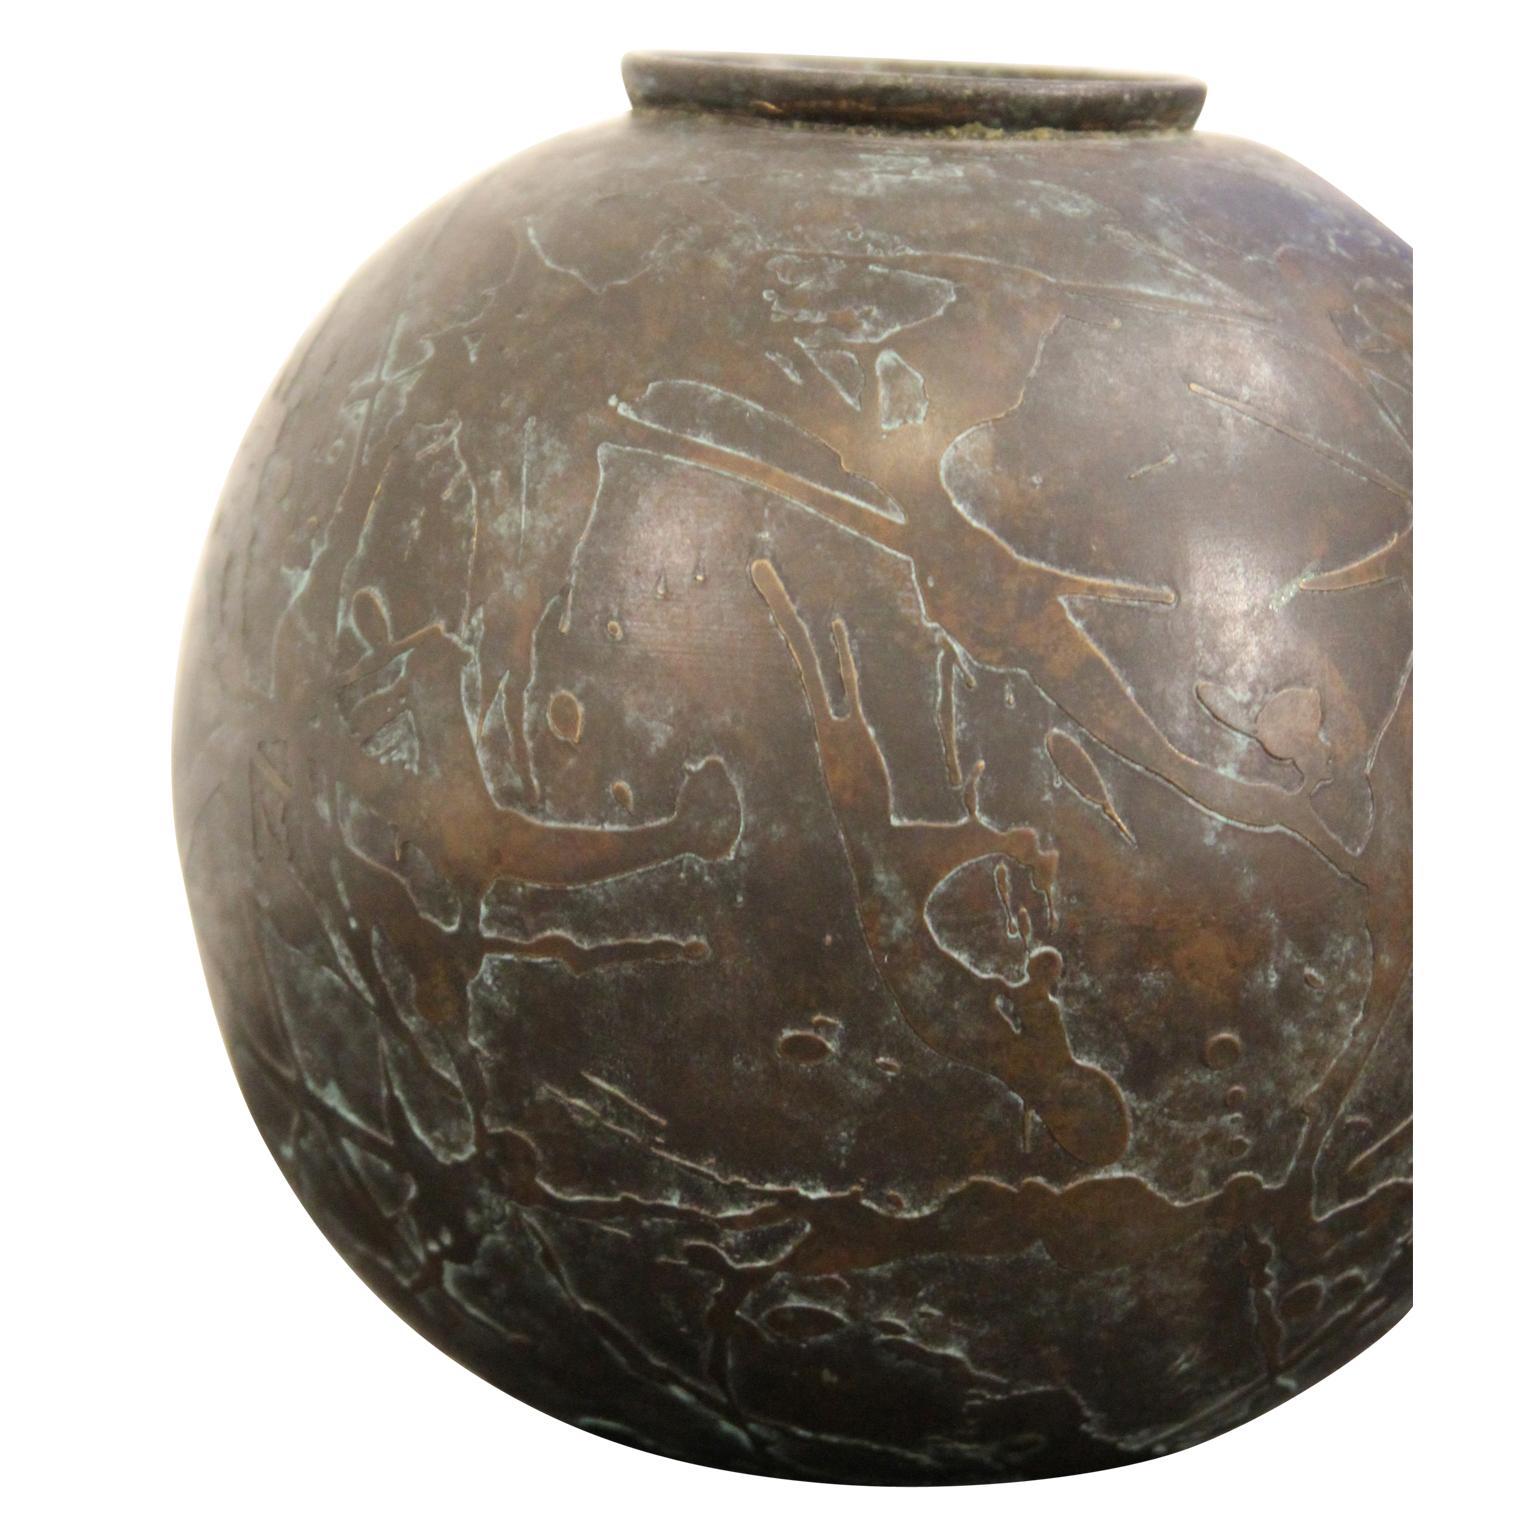 Unique abstract textured bronze vase that is perfectly circular. It has a rimmed top. It has felted bottom to protect the surface it is placed on.